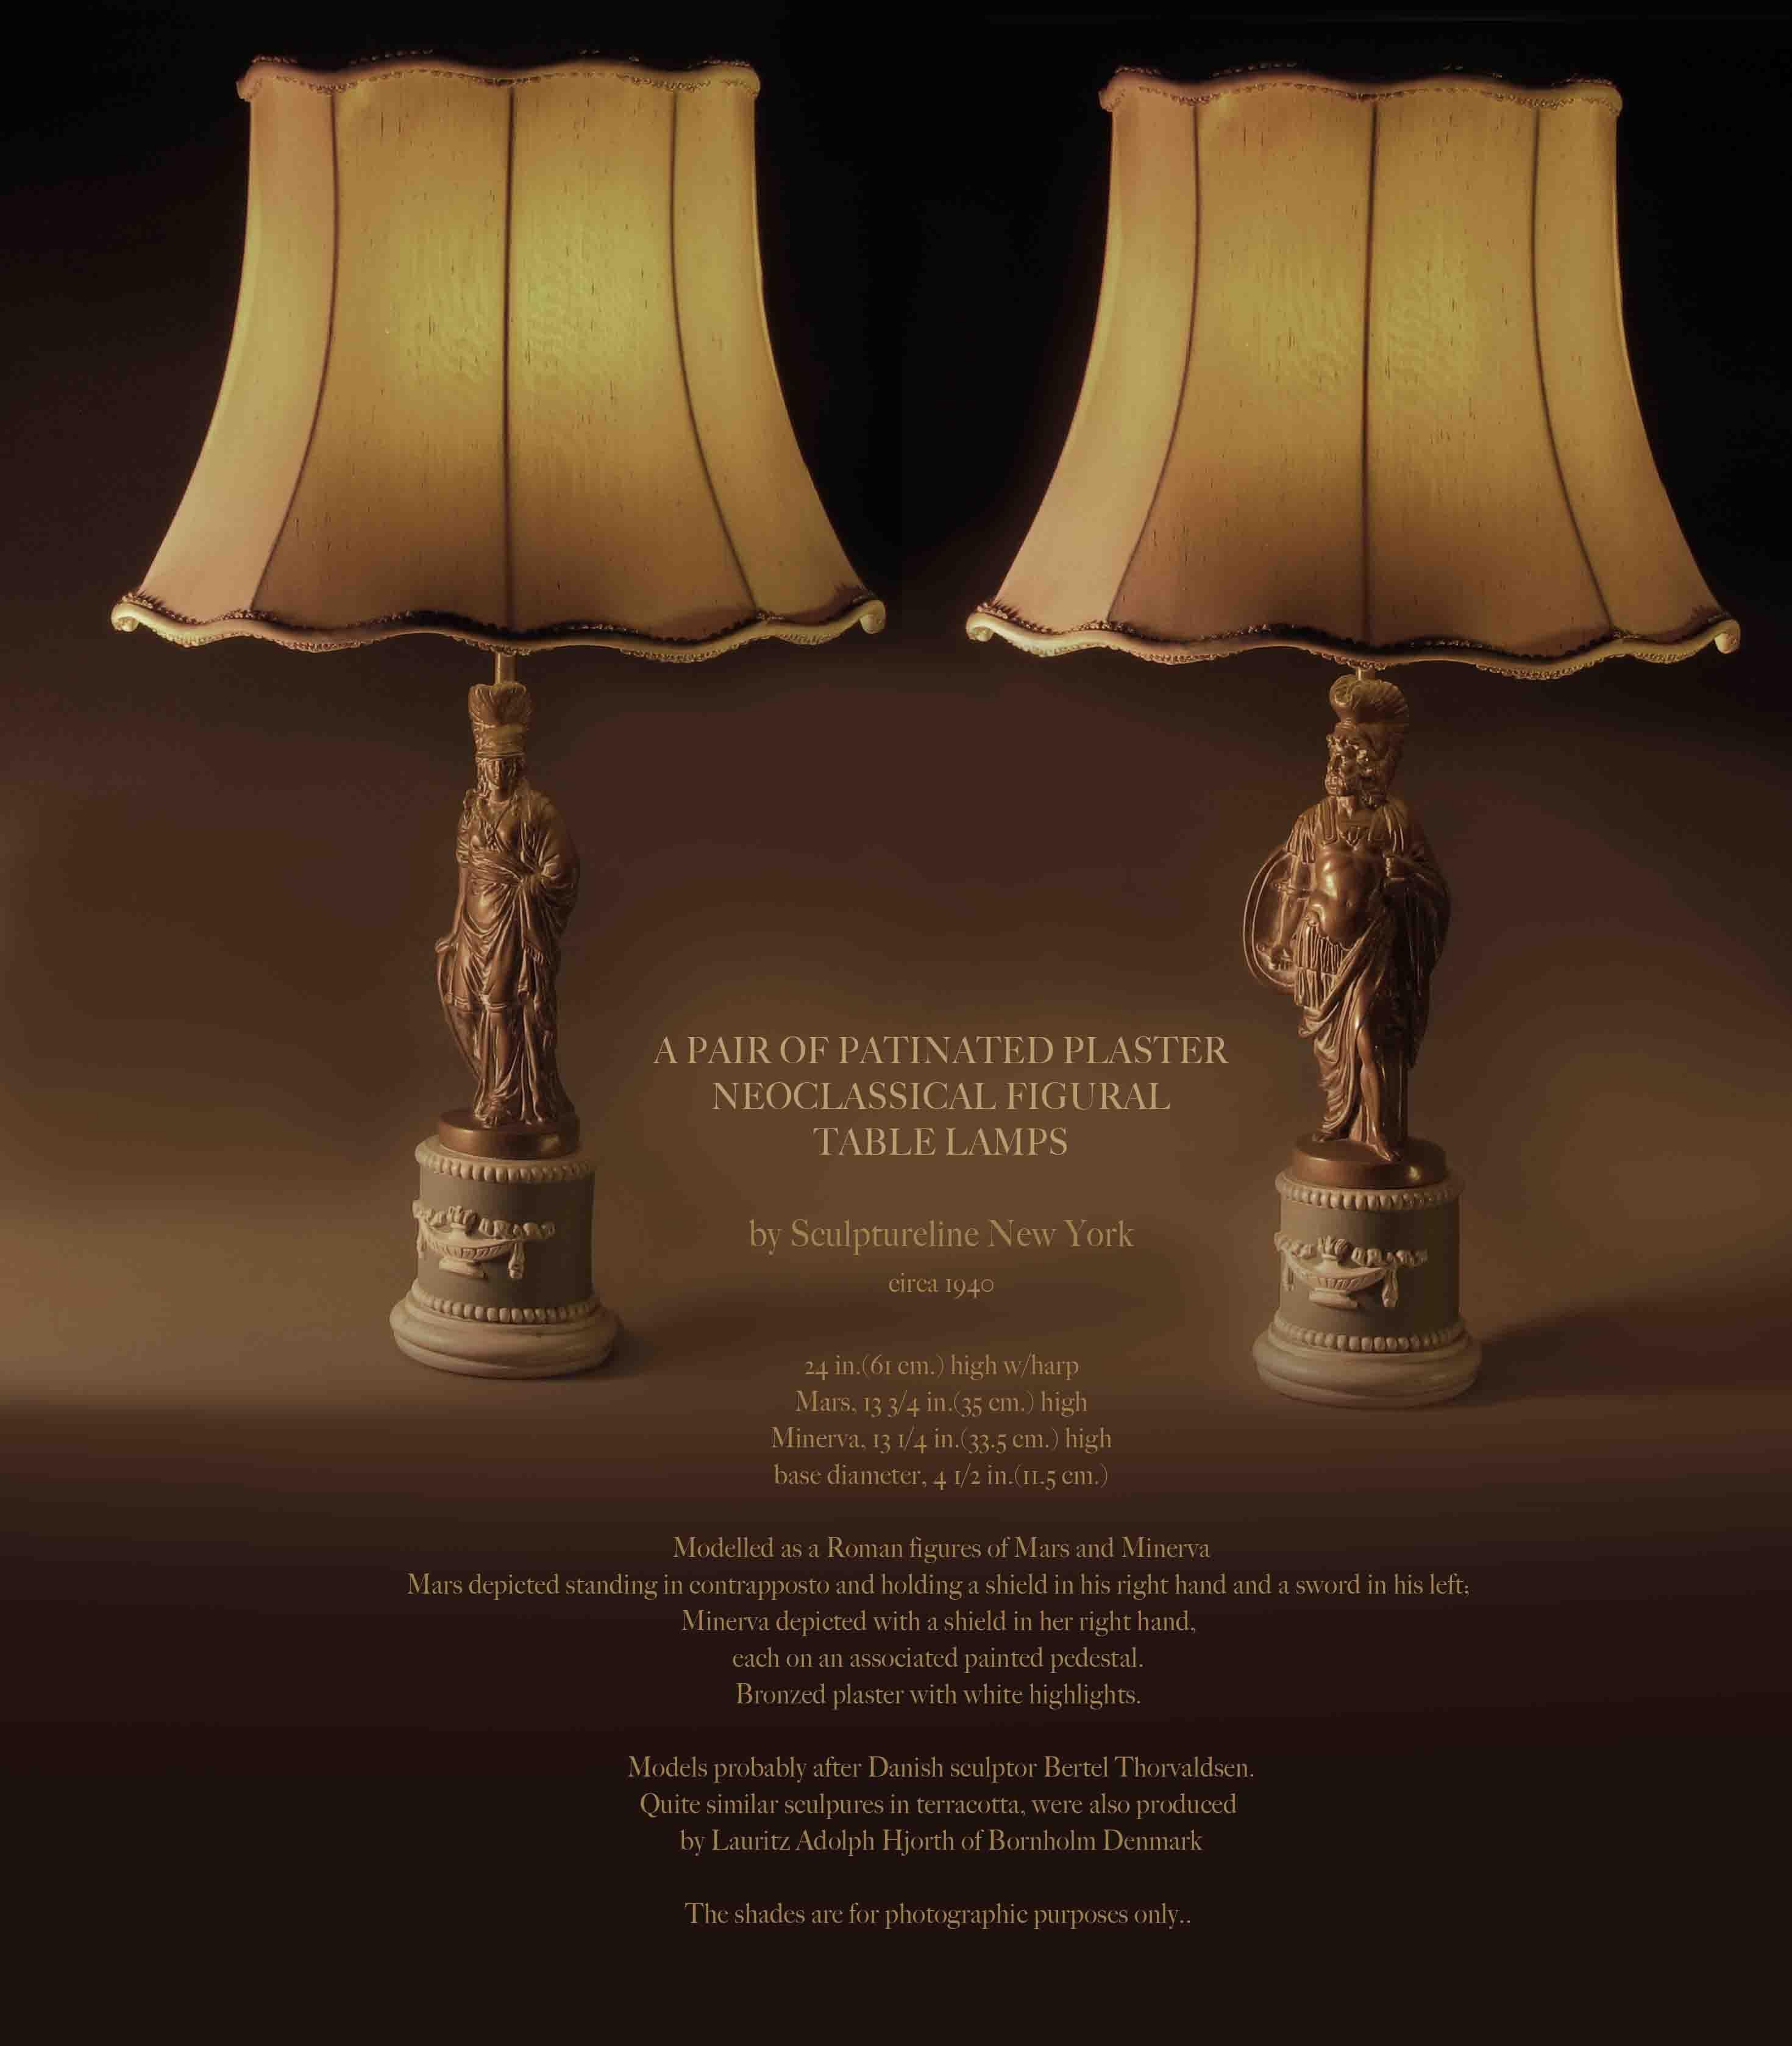 Pair of Patinated Plaster Neoclassical Figural Table Lamps by Sculptureline N.Y. For Sale 8